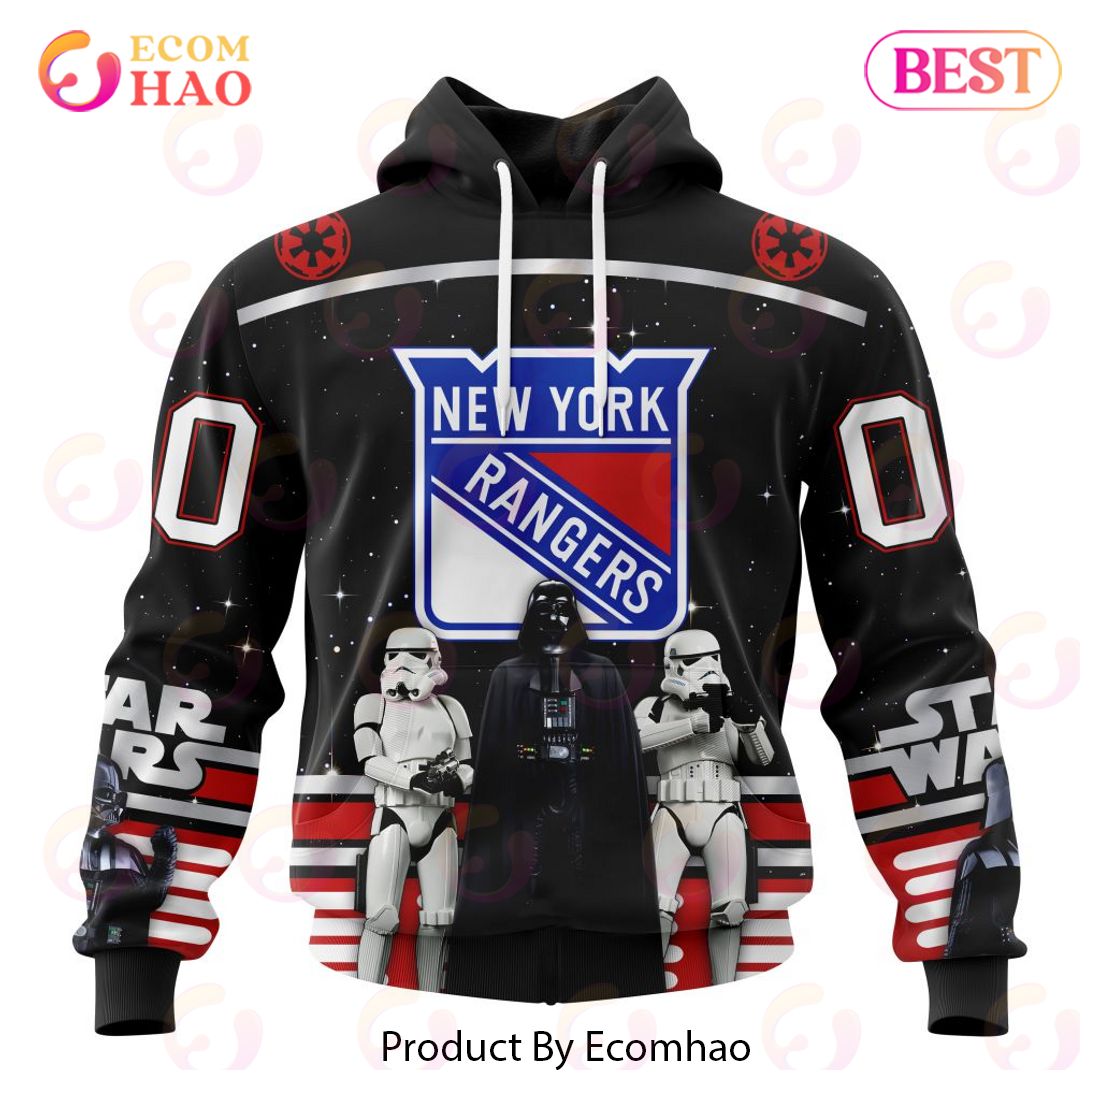 NHL New York Rangers Special Star Wars Design May The 4th Be With You 3D Hoodie